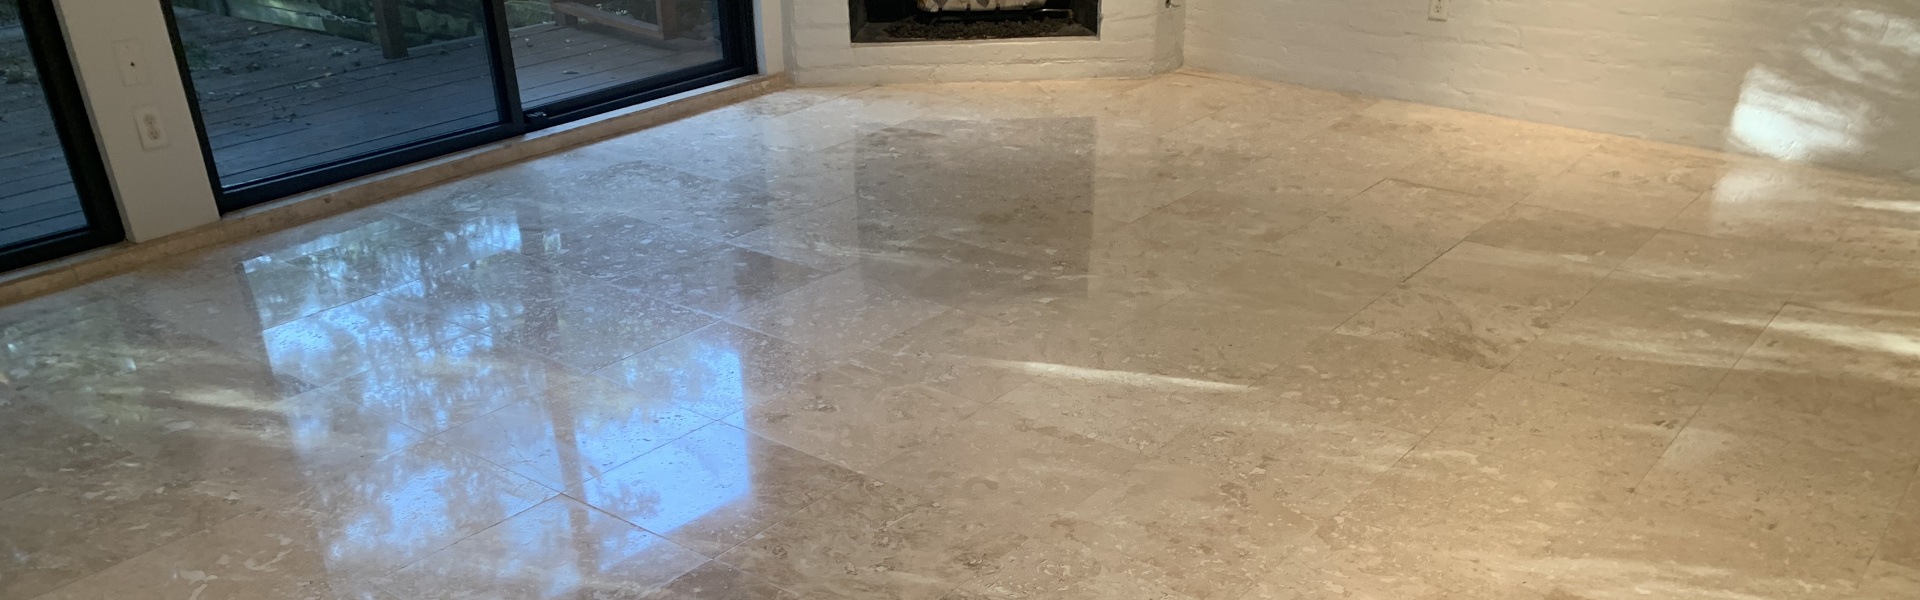 Travertine Cleaning & Polishing Services near Coppell, Texas